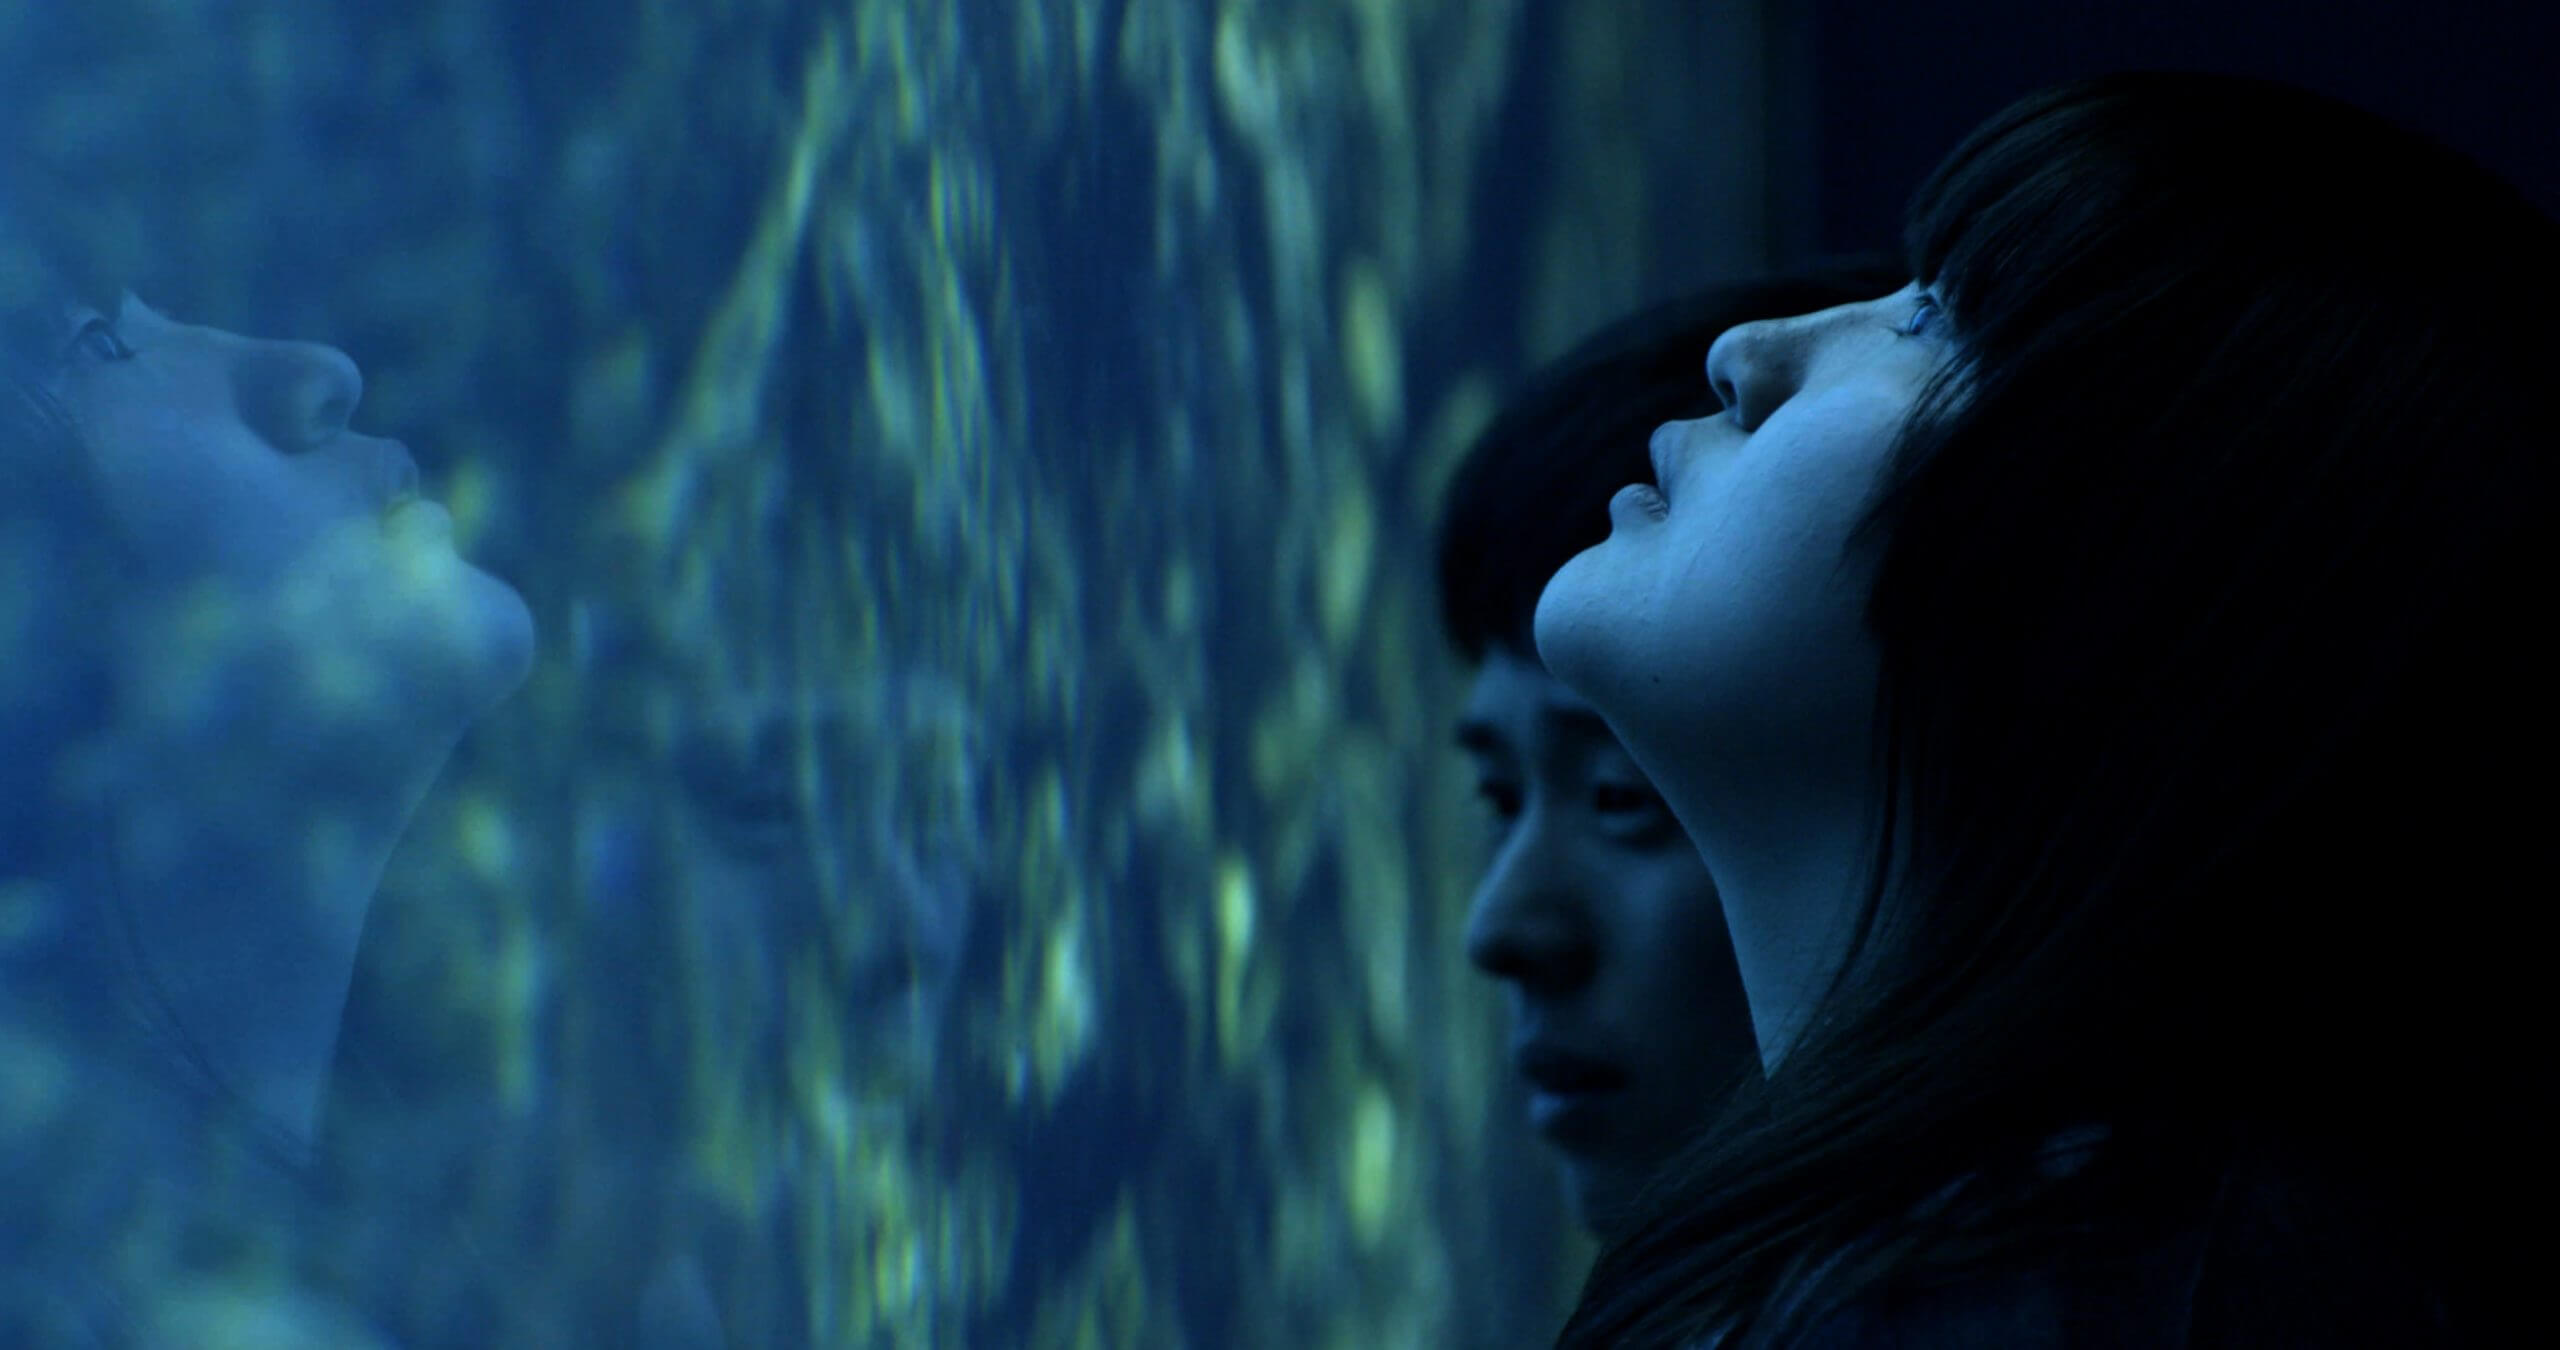 Still from All of Our Heartbeats Are Connected Through Exploding Stars. Two persons looking at a water tank, their reflection on the glass in visible.